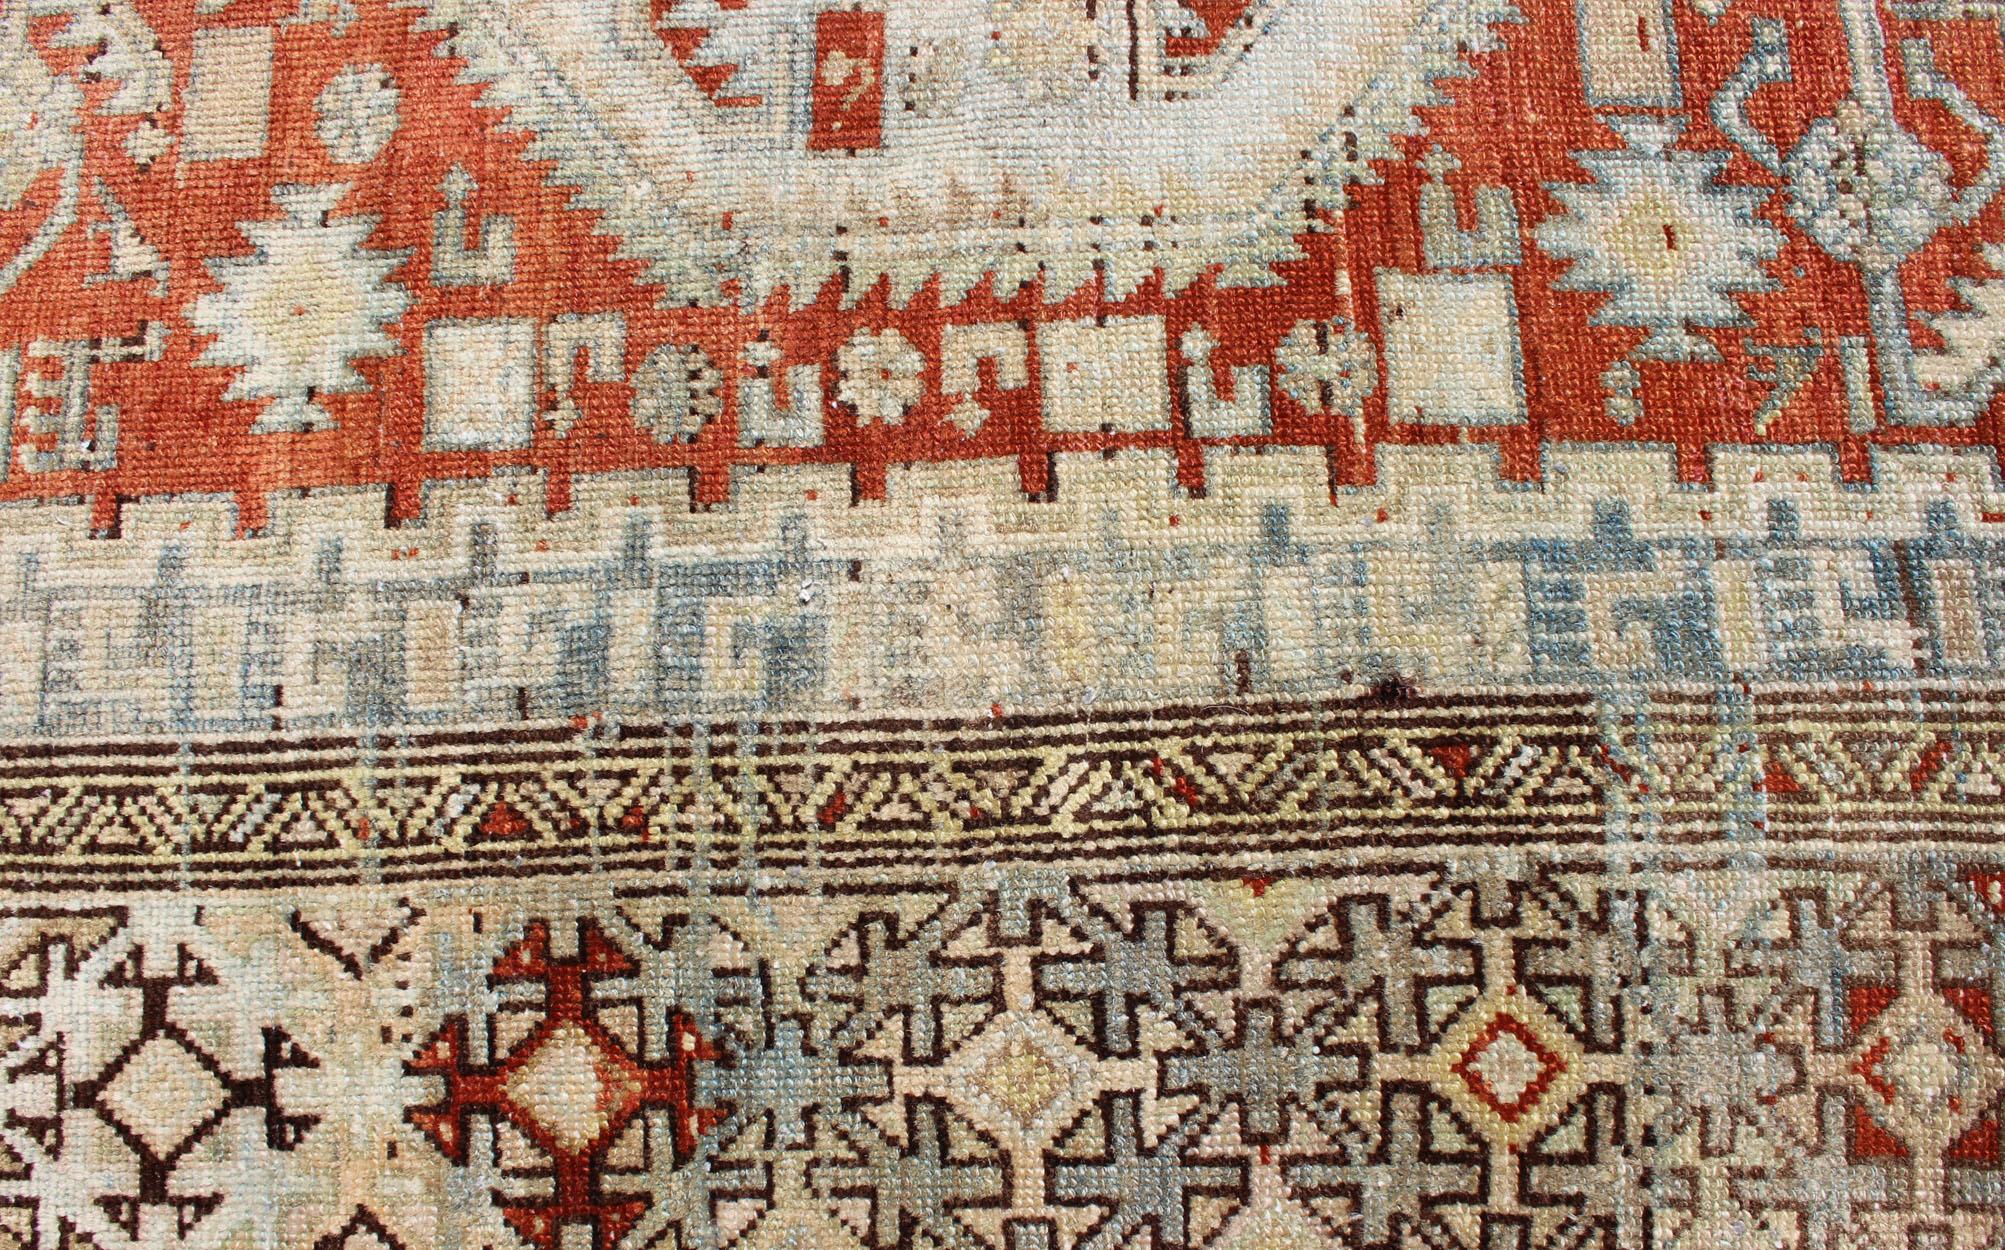 Early 20th Century Orange-Red, Light Gray/Blue Antique Persian Malayer Rug with Geometric Design For Sale